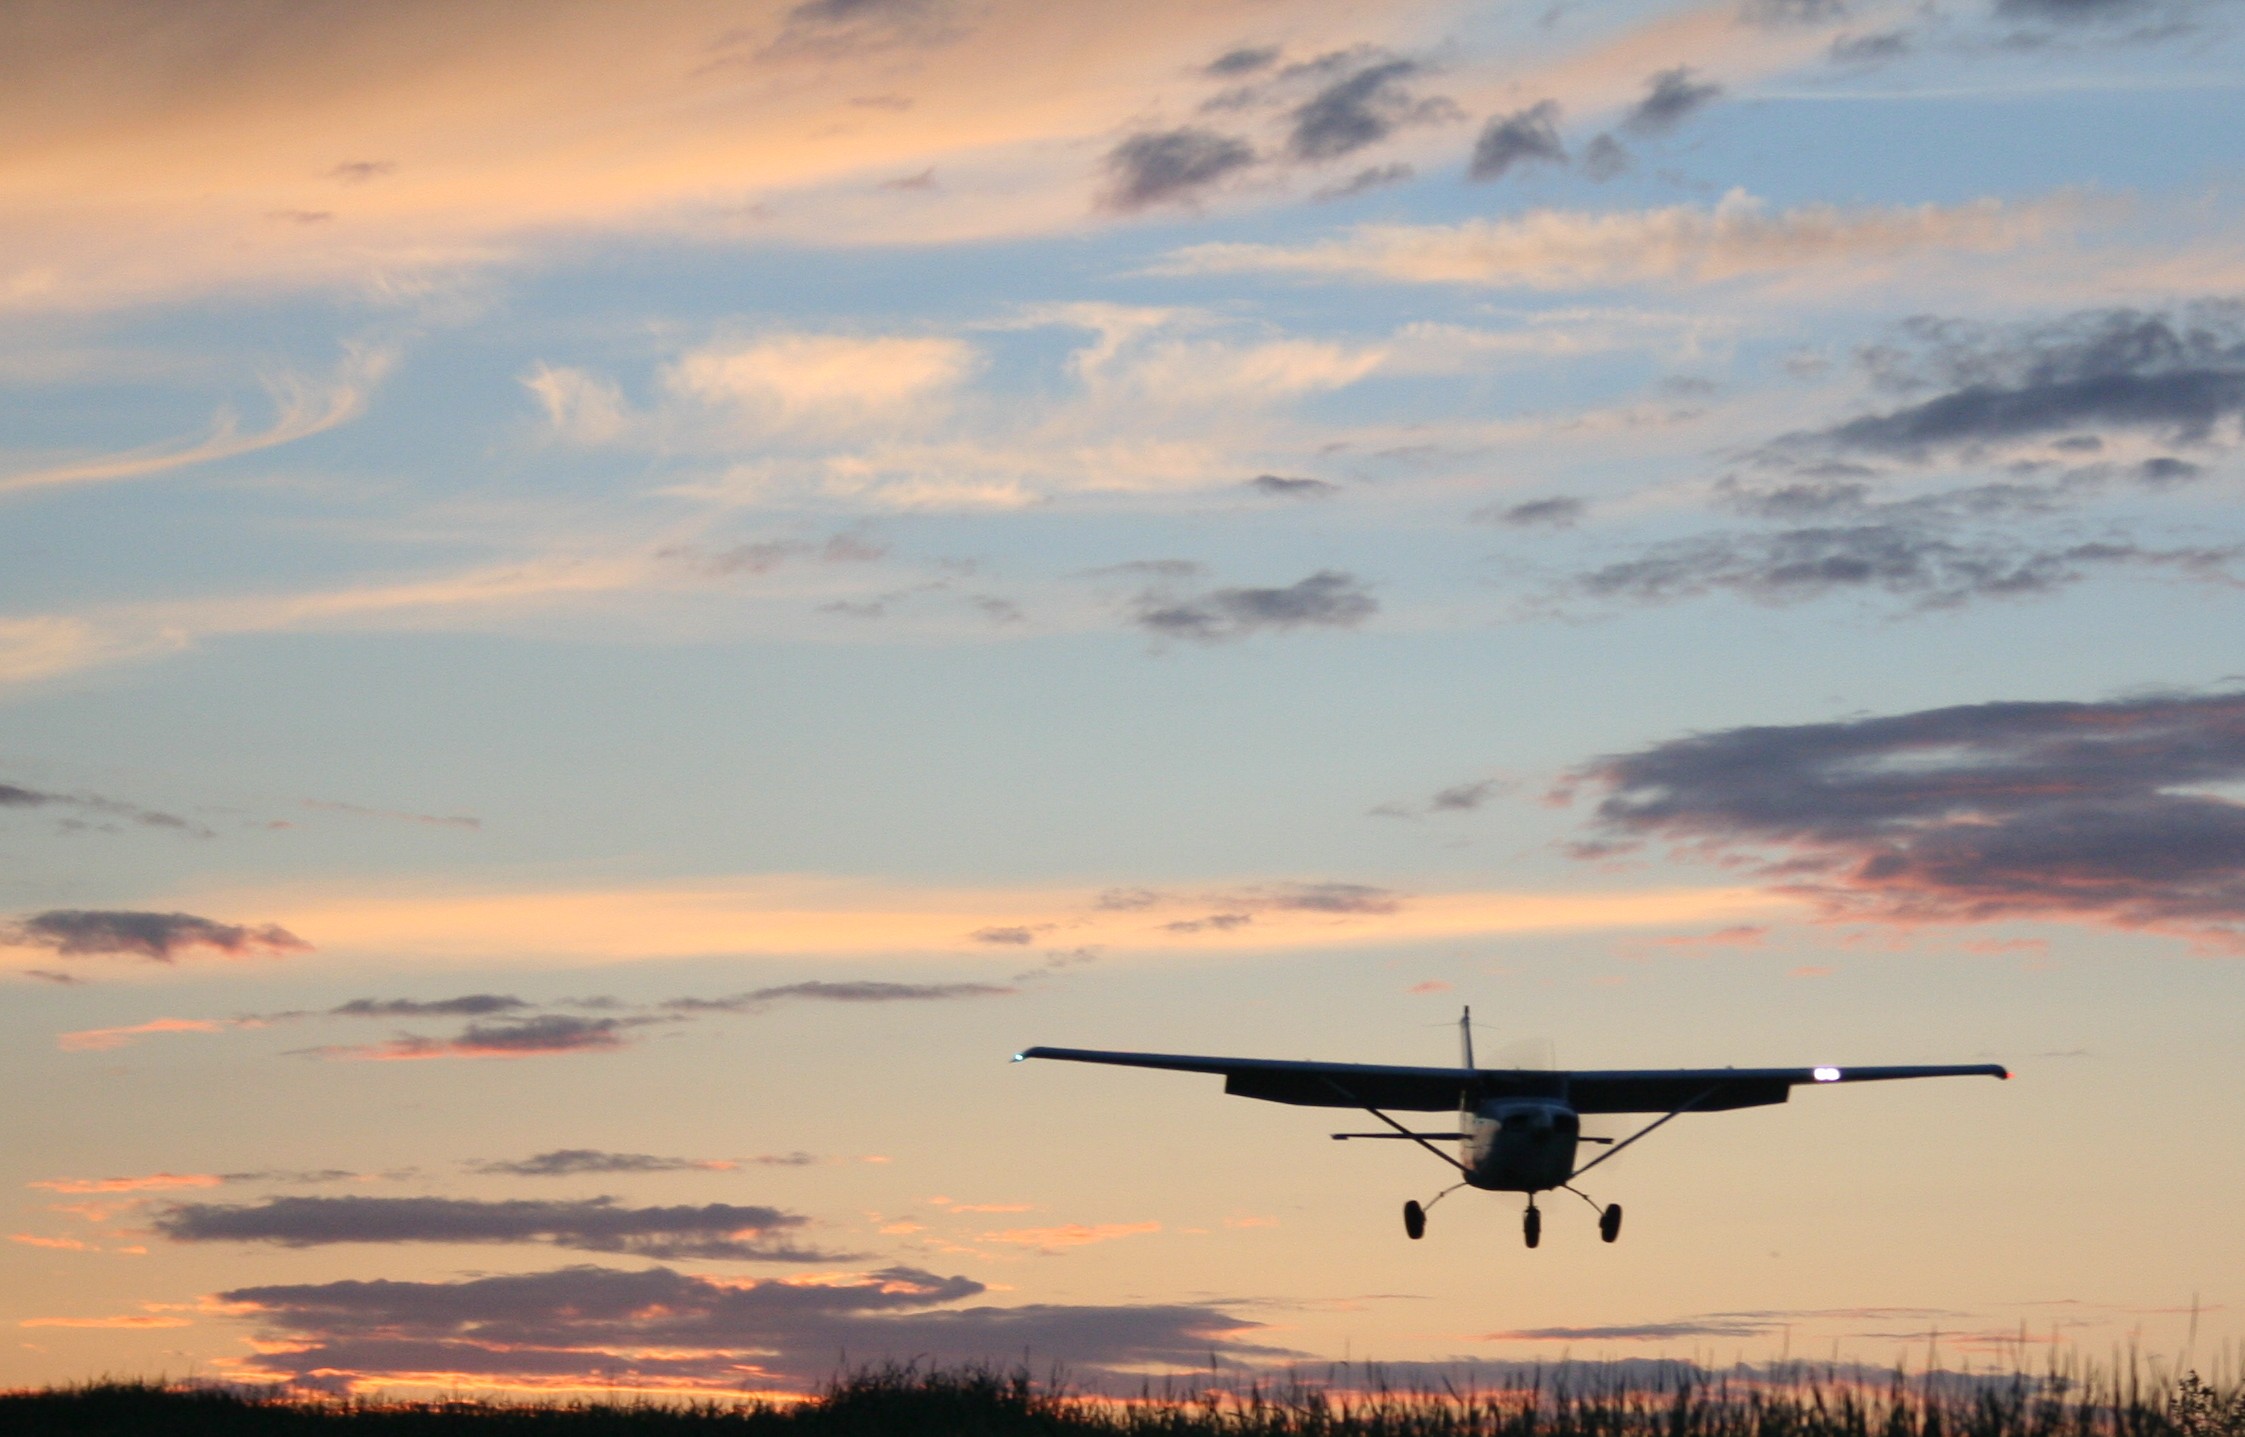 A single engine aircraft flying close to the ground near sunset.